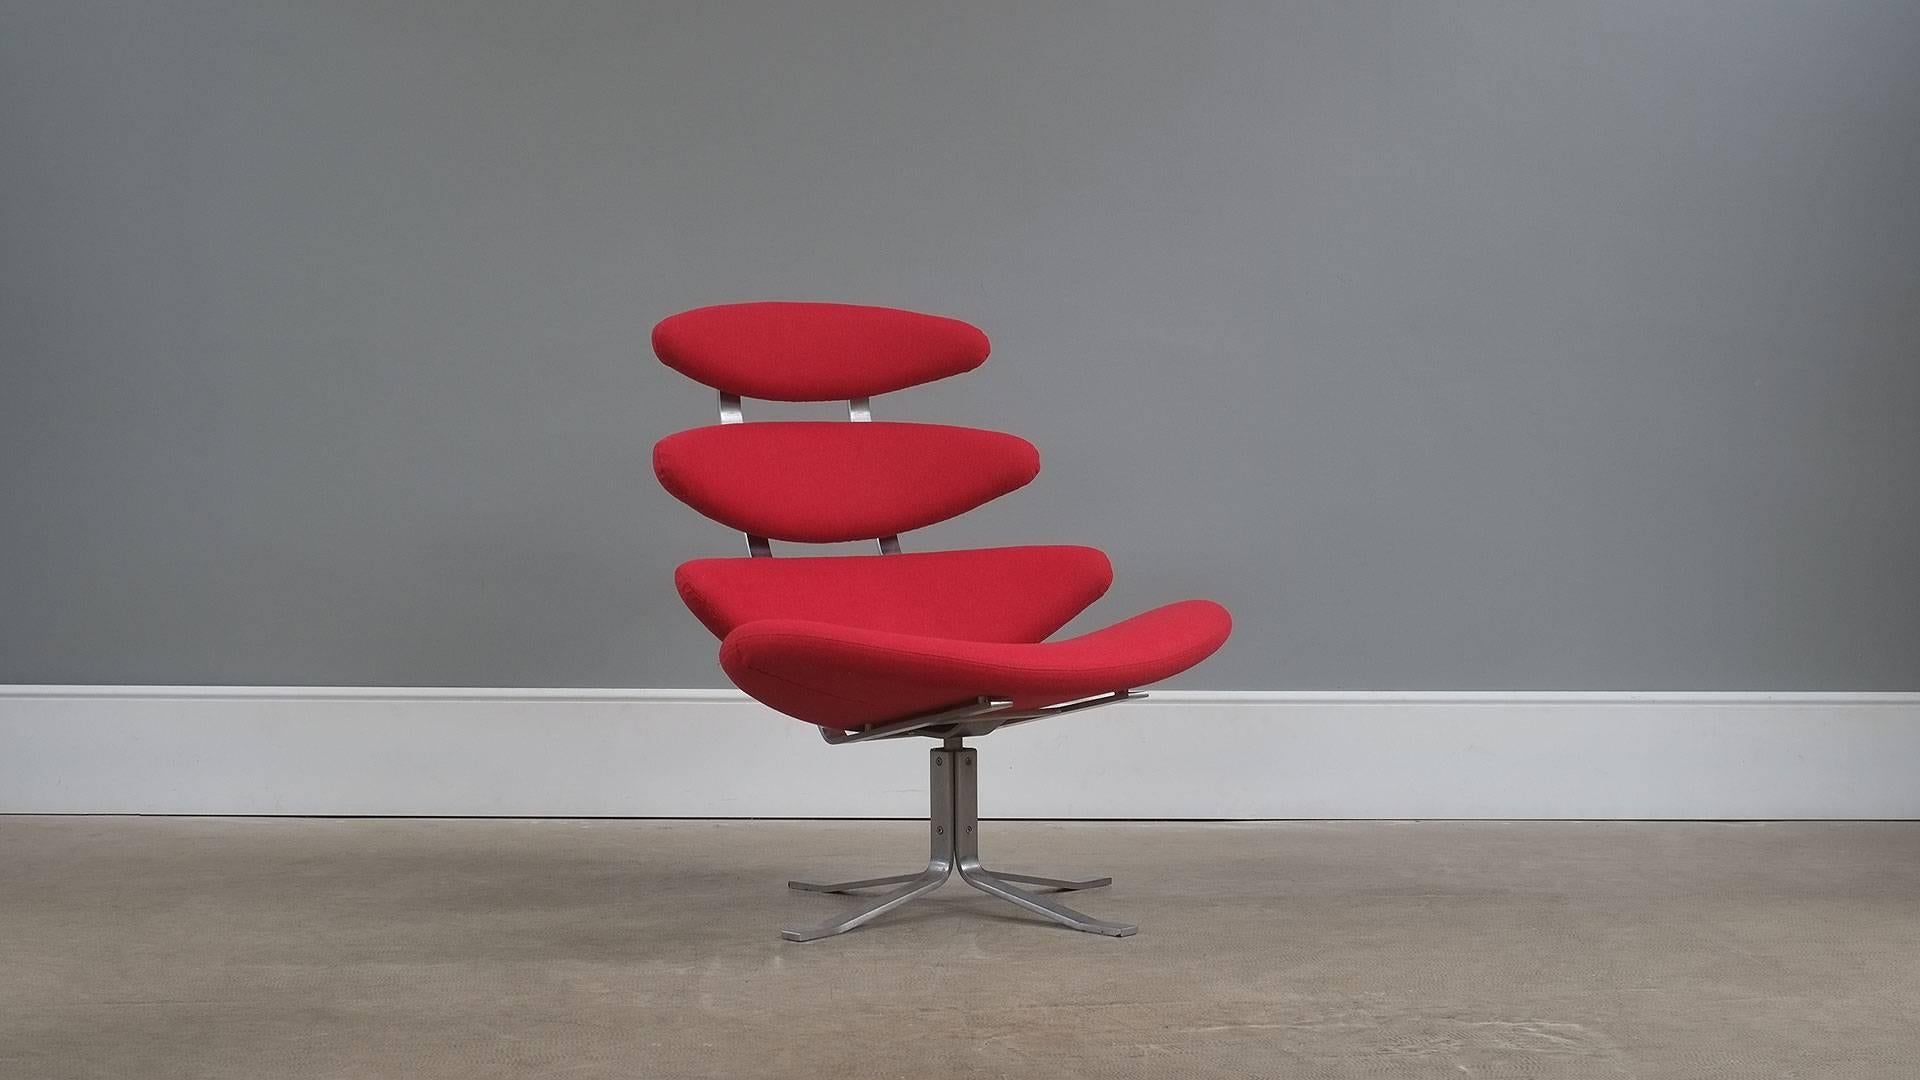 Classic original Corona chair designed by Poul Volther for Erik Jorgensen, Denmark. This example fully reconditioned and reupholstered in ‘ladybird’ red wool. Super high quality and ultra comfortable chair. Two chairs available.